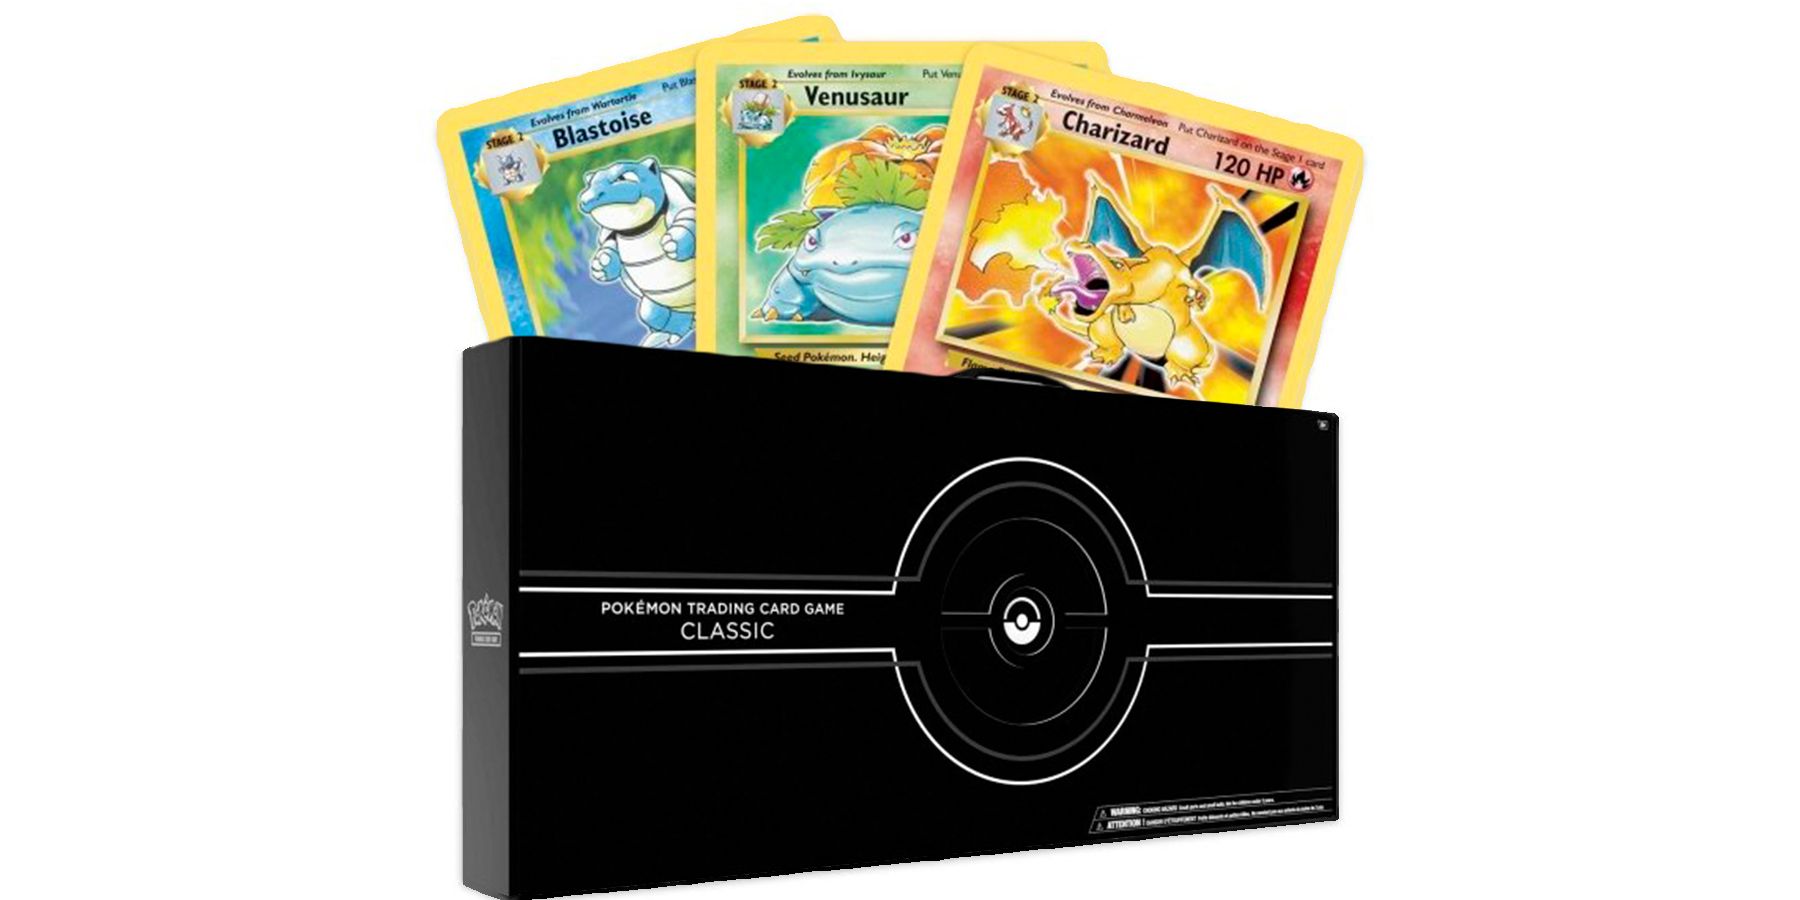 Pokemon Trading Card Game TCG Classic box with max starter evolution cards